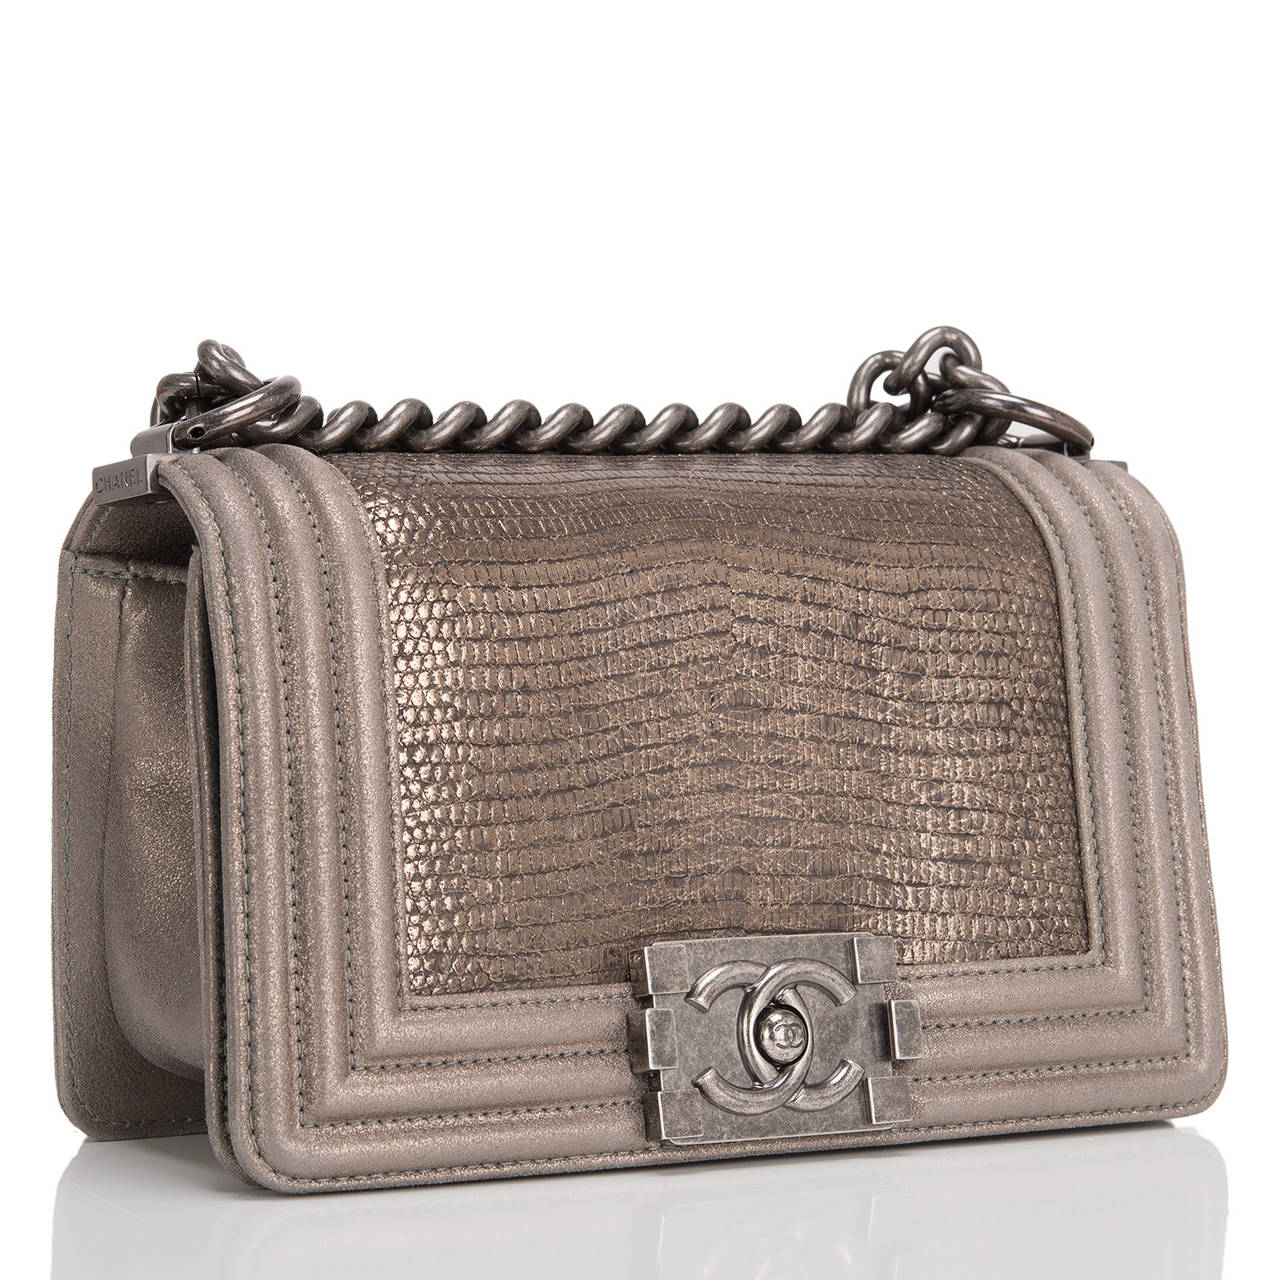 This limited edition Small Boy bag is exceptional in bronze lizard, accented by metallic bronzed lambskin leather and aged ruthenium hardware. The bag has a full front flap with the Boy Chanel signature CC push lock closure and aged ruthenium chain